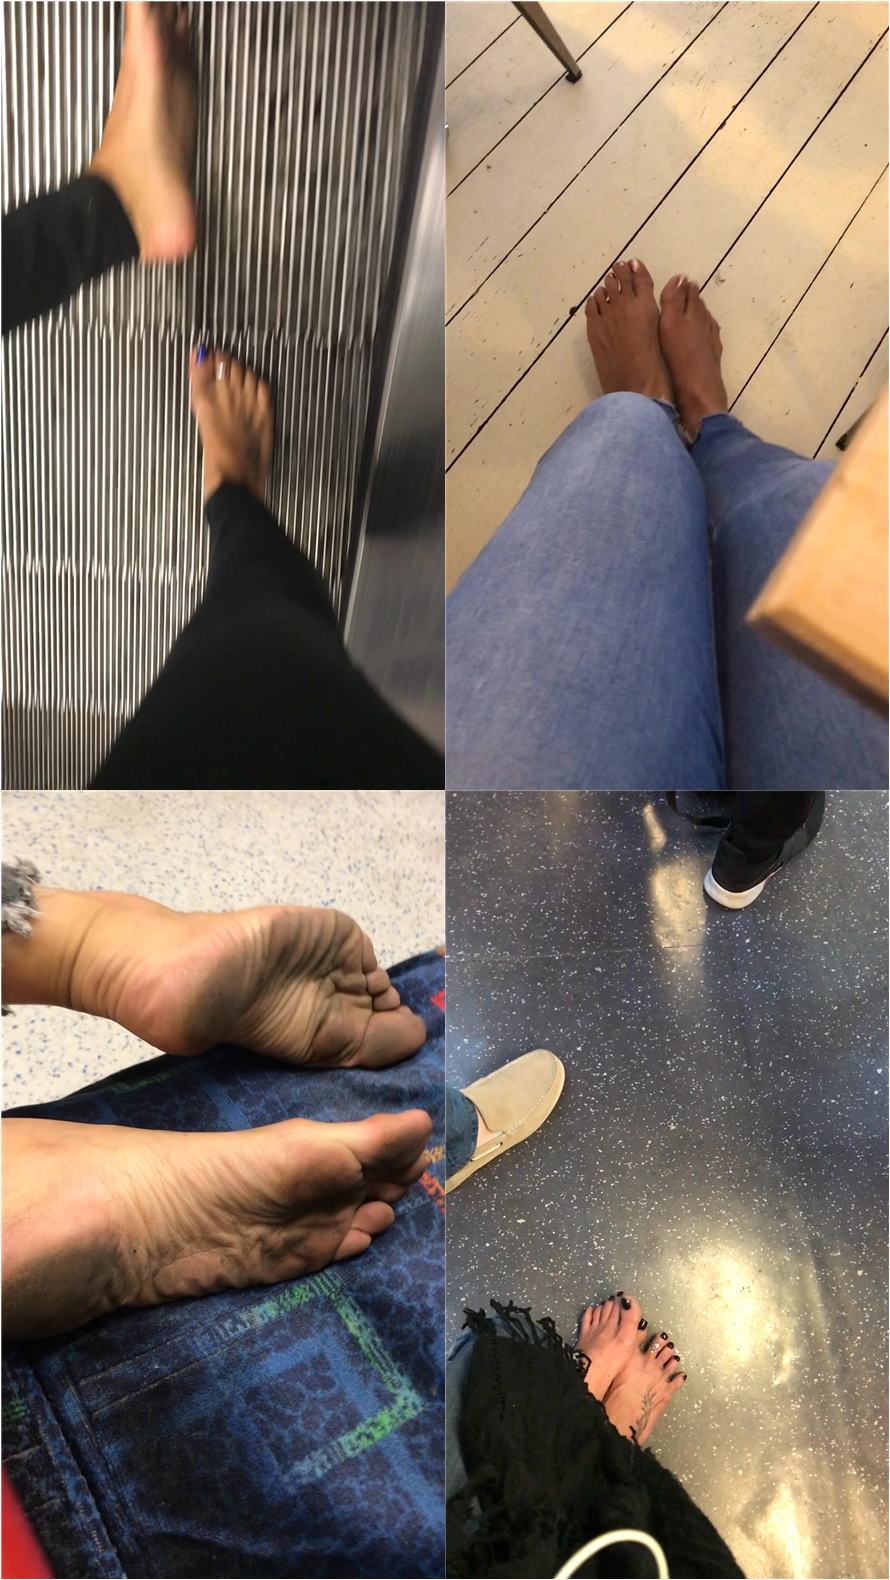 Feetwonders - Barefoot- various locations compilation